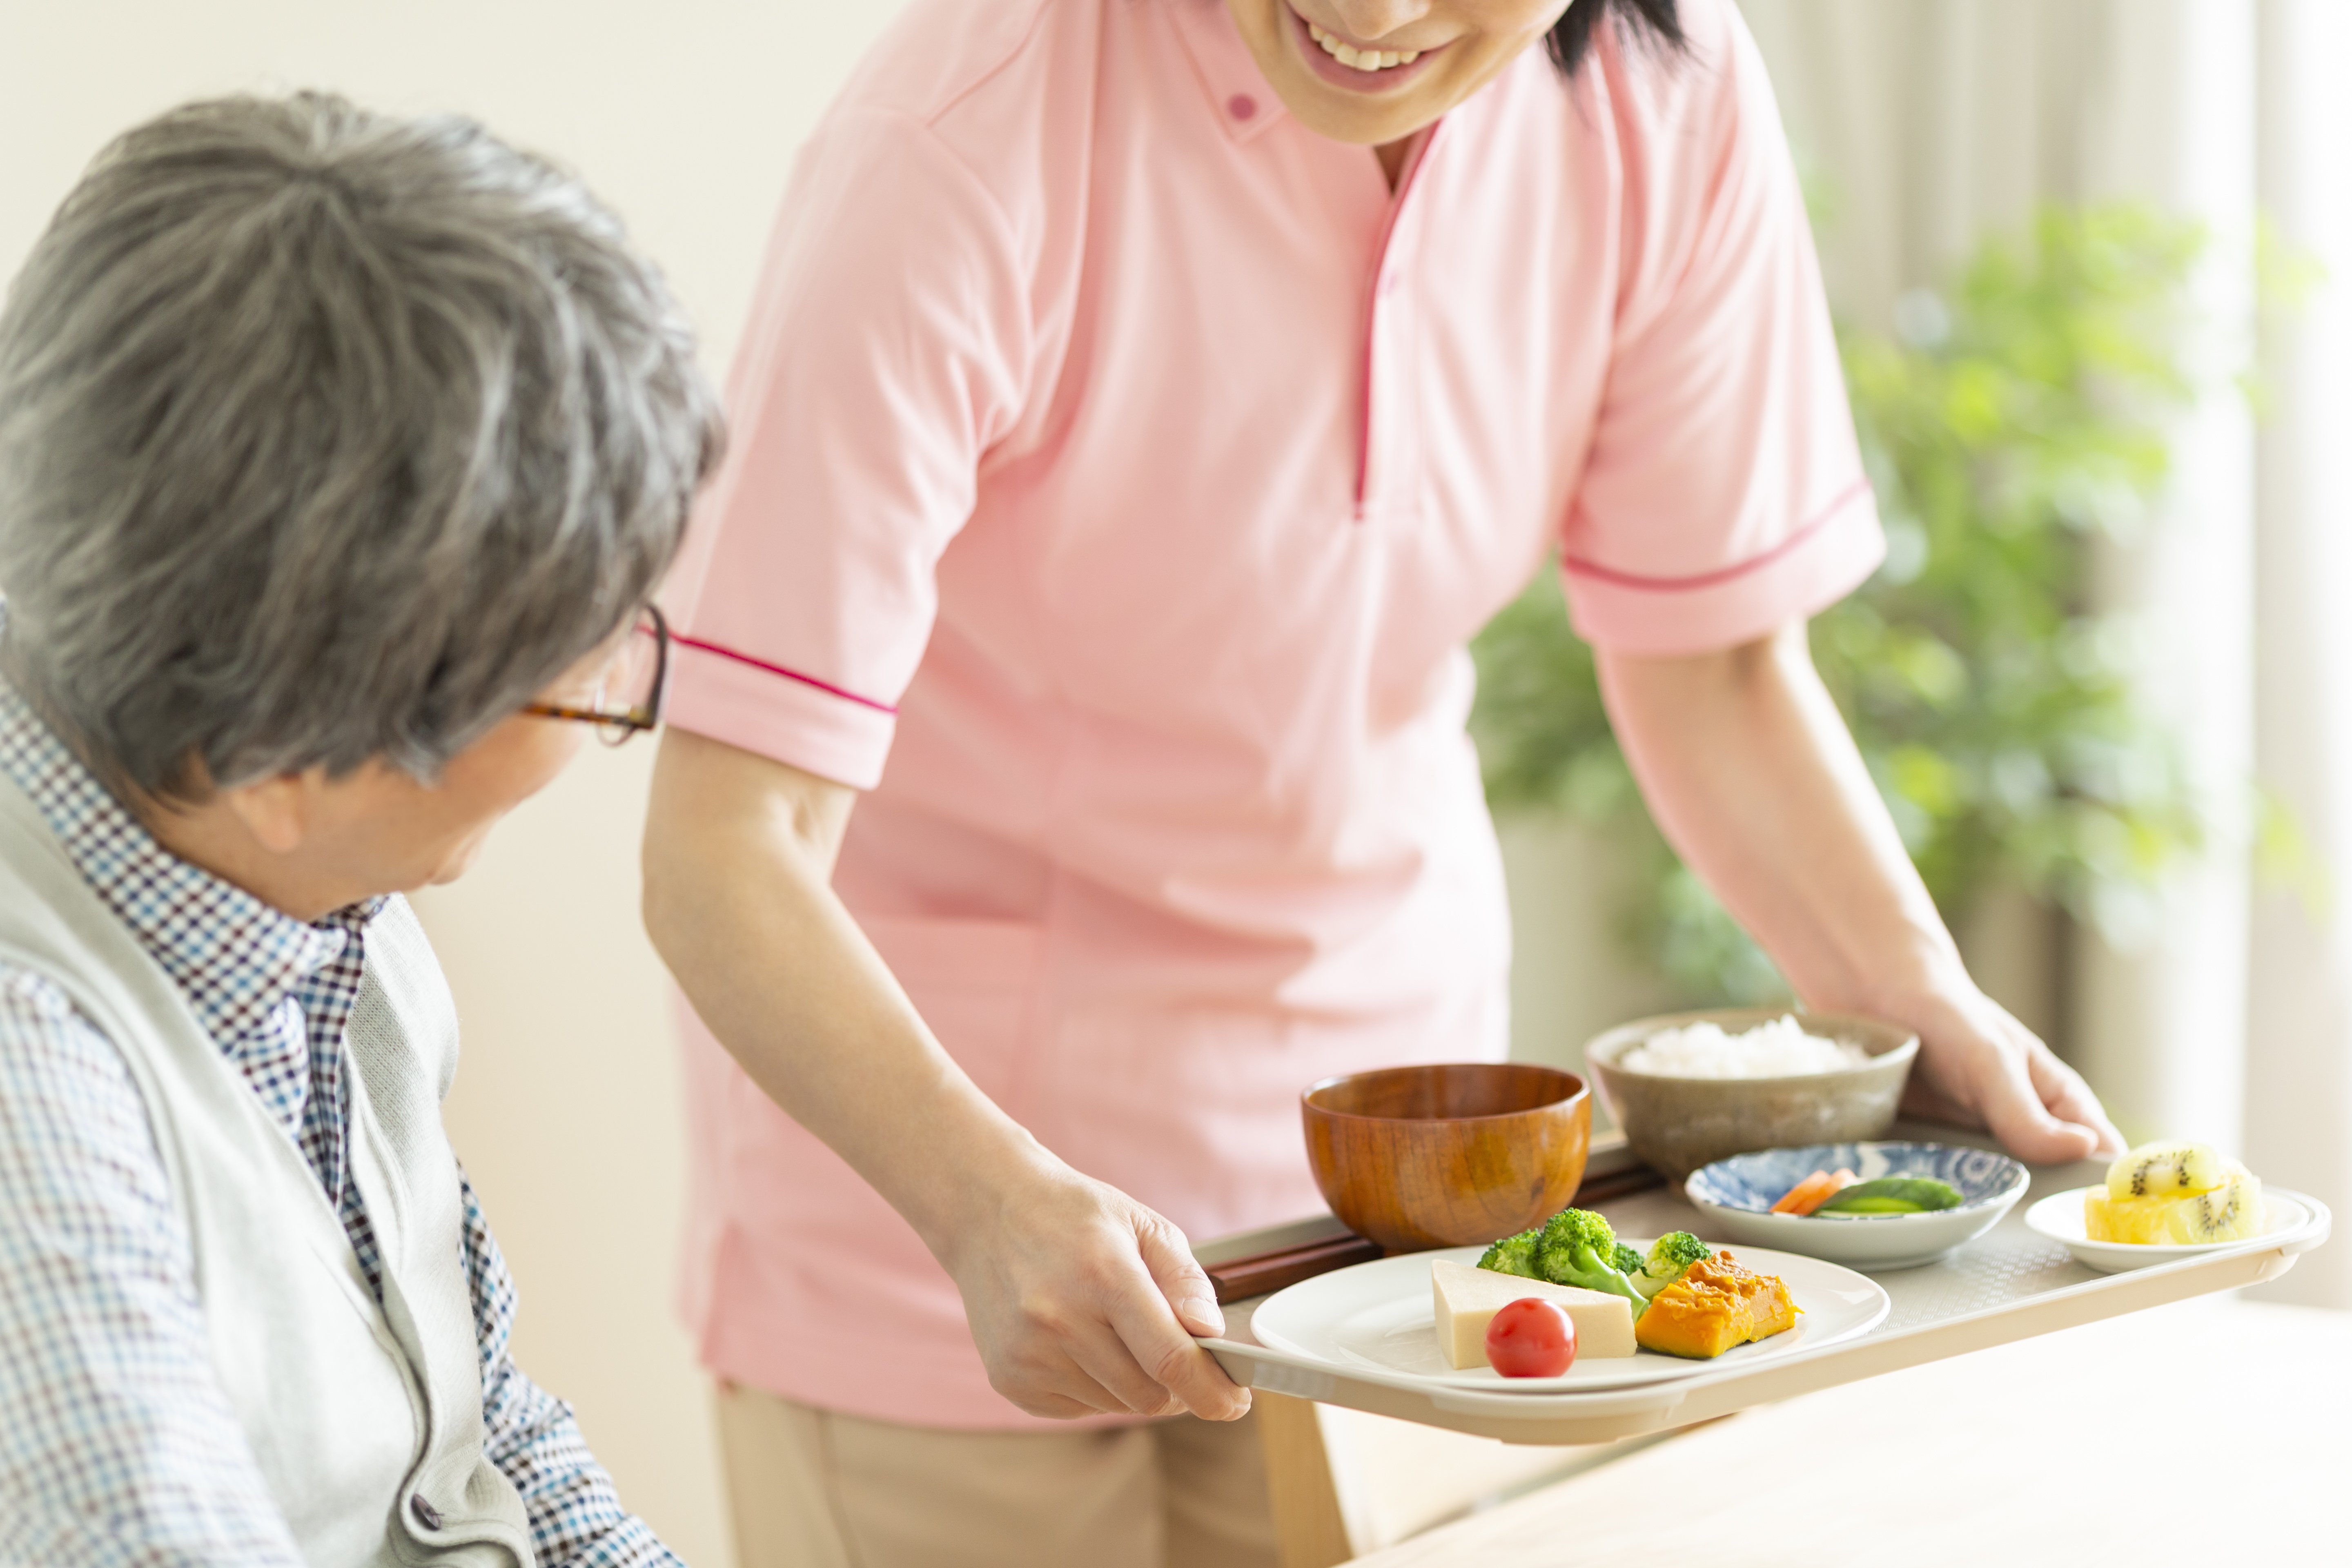 How Meal Preparation Services Keep Seniors Safe at Home